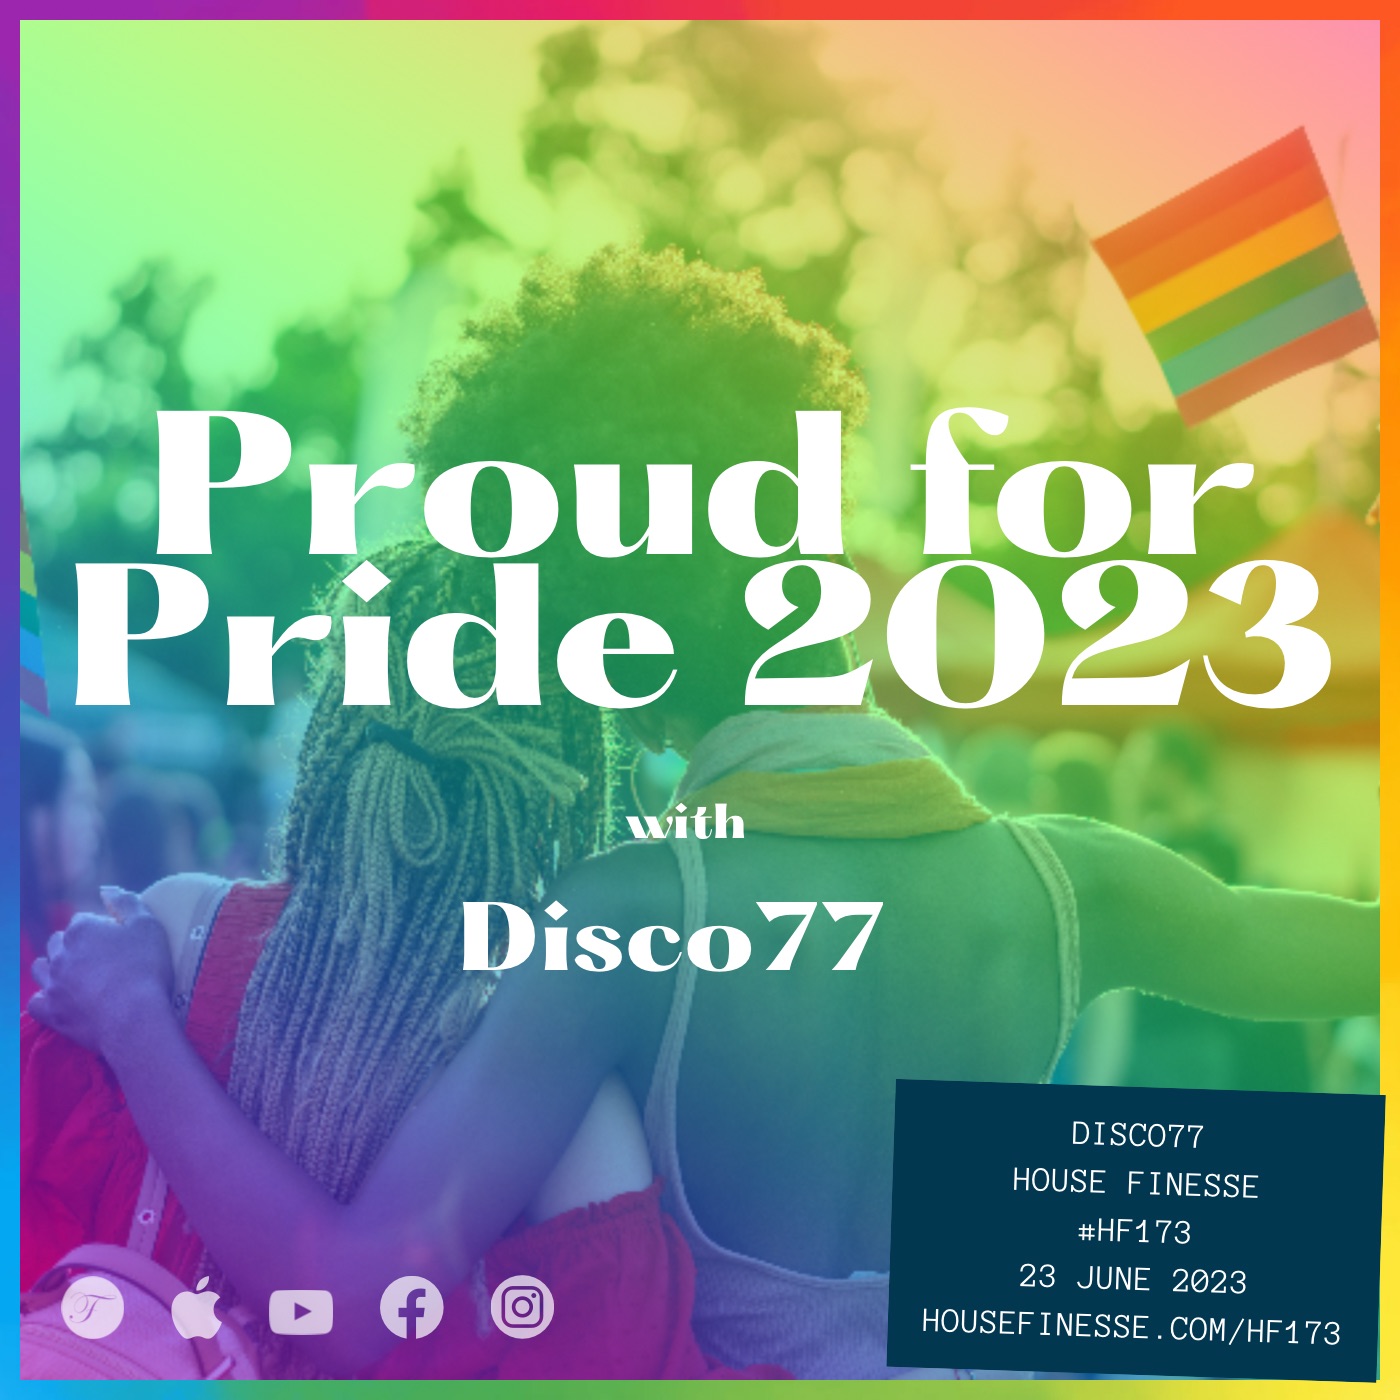 Proud for Pride 2023 with Disco77